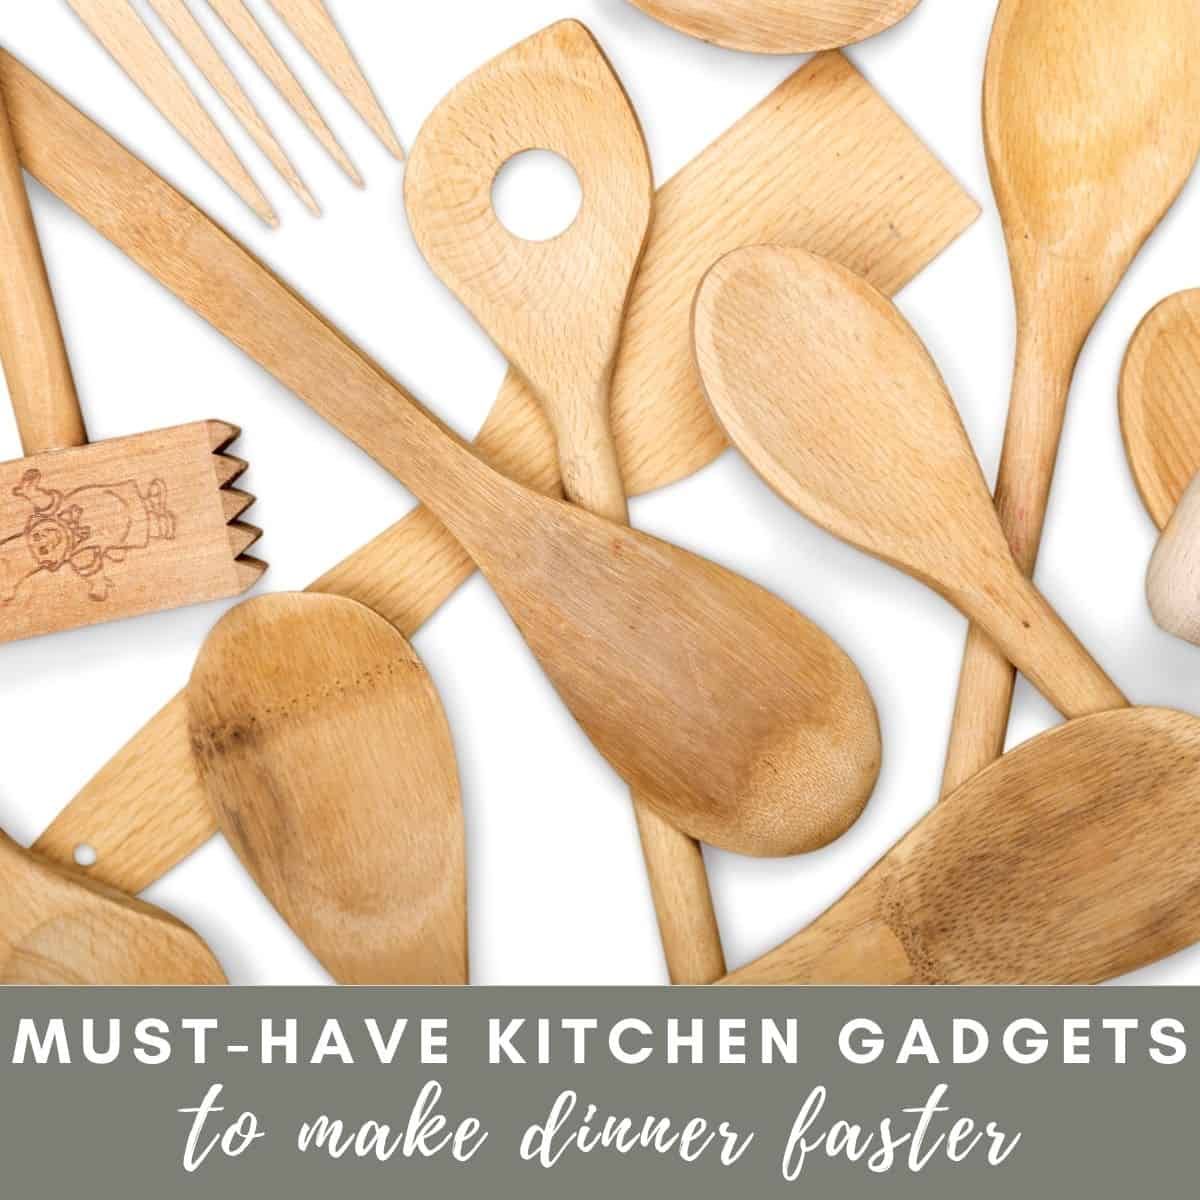 https://www.cupcakesandcutlery.com/wp-content/uploads/2021/12/must-have-kitchen-gadgets-and-tools-to-make-dinner-fast-featured-image.jpg